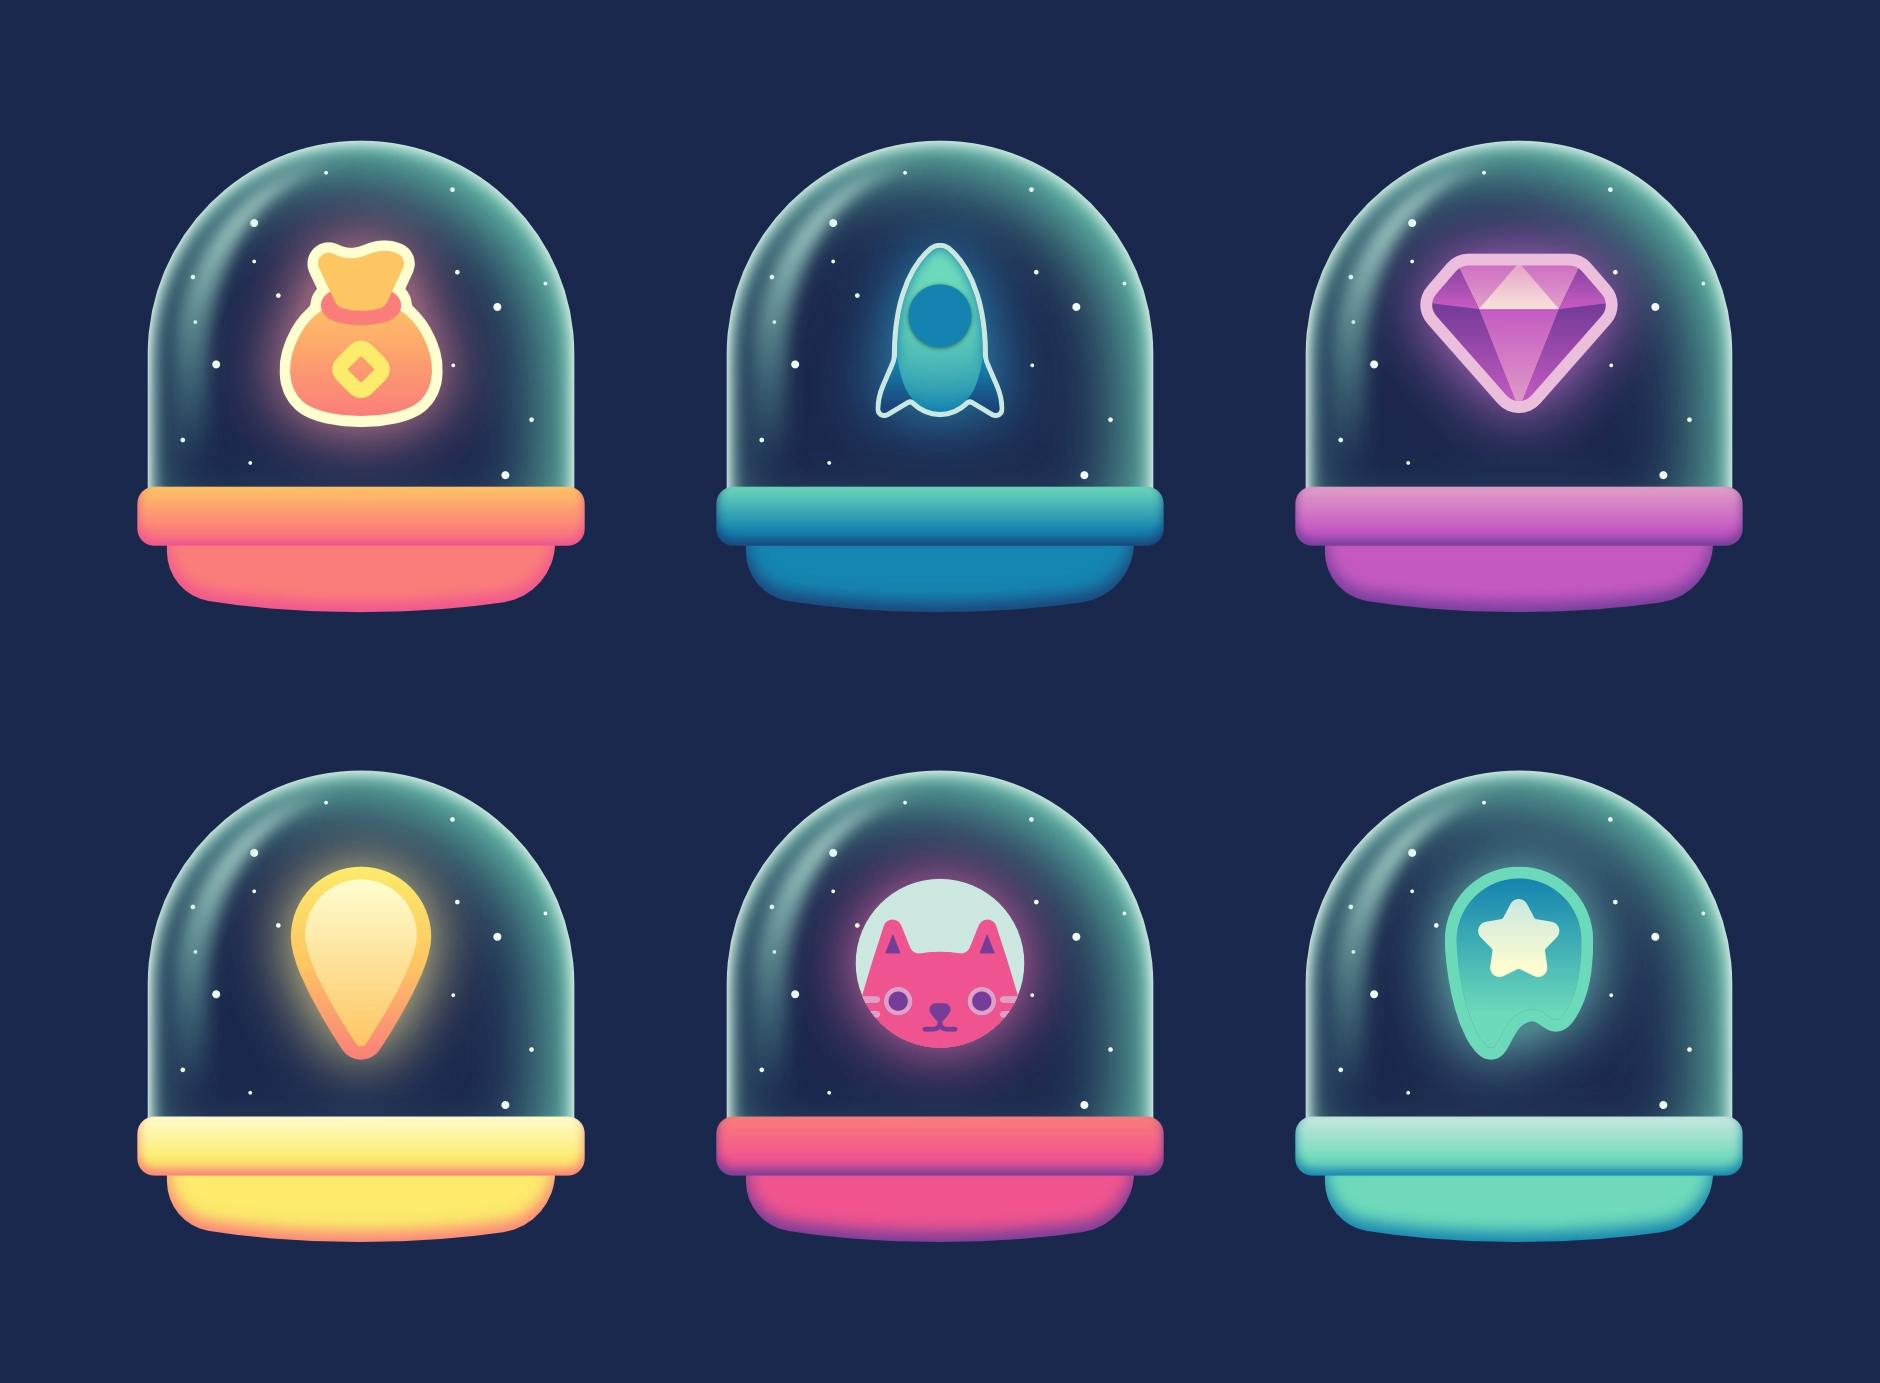 six capsules, each containing an item from the game shop: a bag of coins, a rocket ship, a gem, an exhaust trail option, a cat character, and a boost power-up